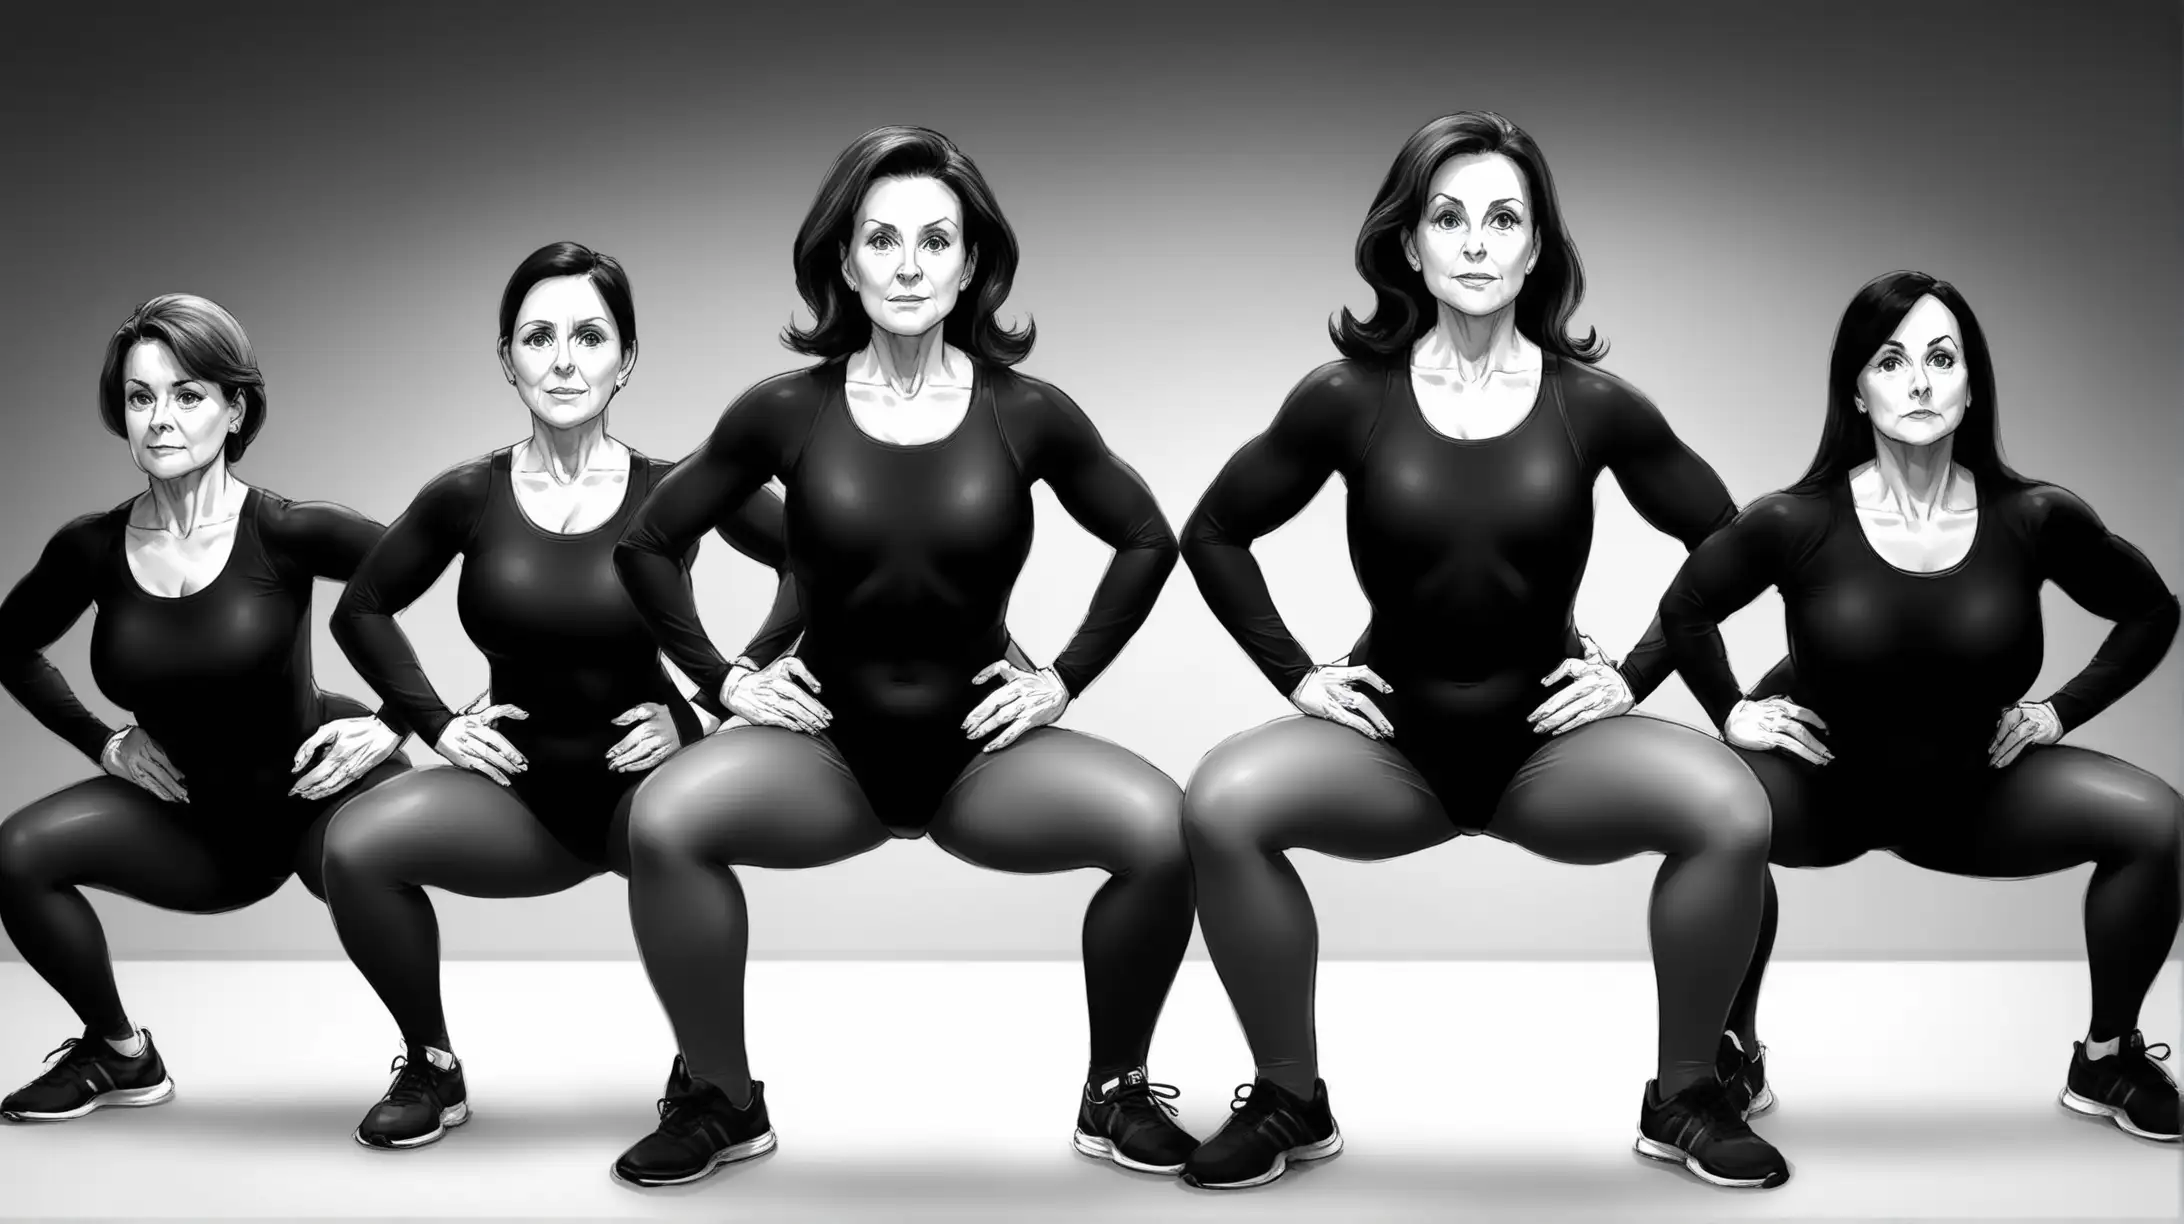 Mature Monochrome, Brunette Women, all wearing Black Full Sleeve High Cut Leotards, Gray Pantyhose, Hands on Hips, all doing Squats exercises.